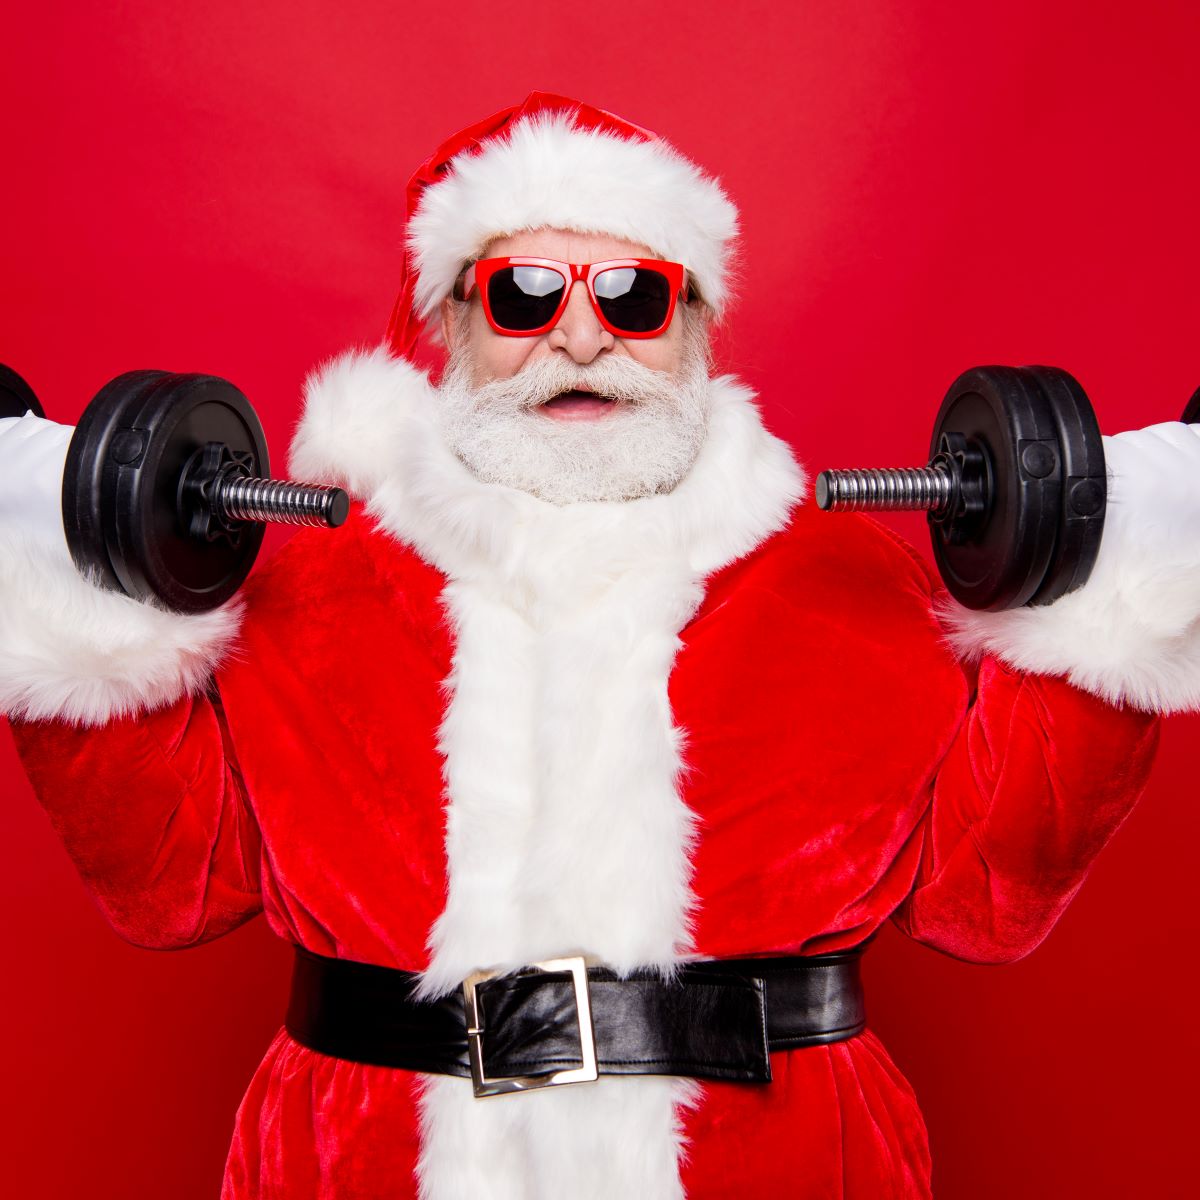 Santa lifting weights to stay fit this holiday